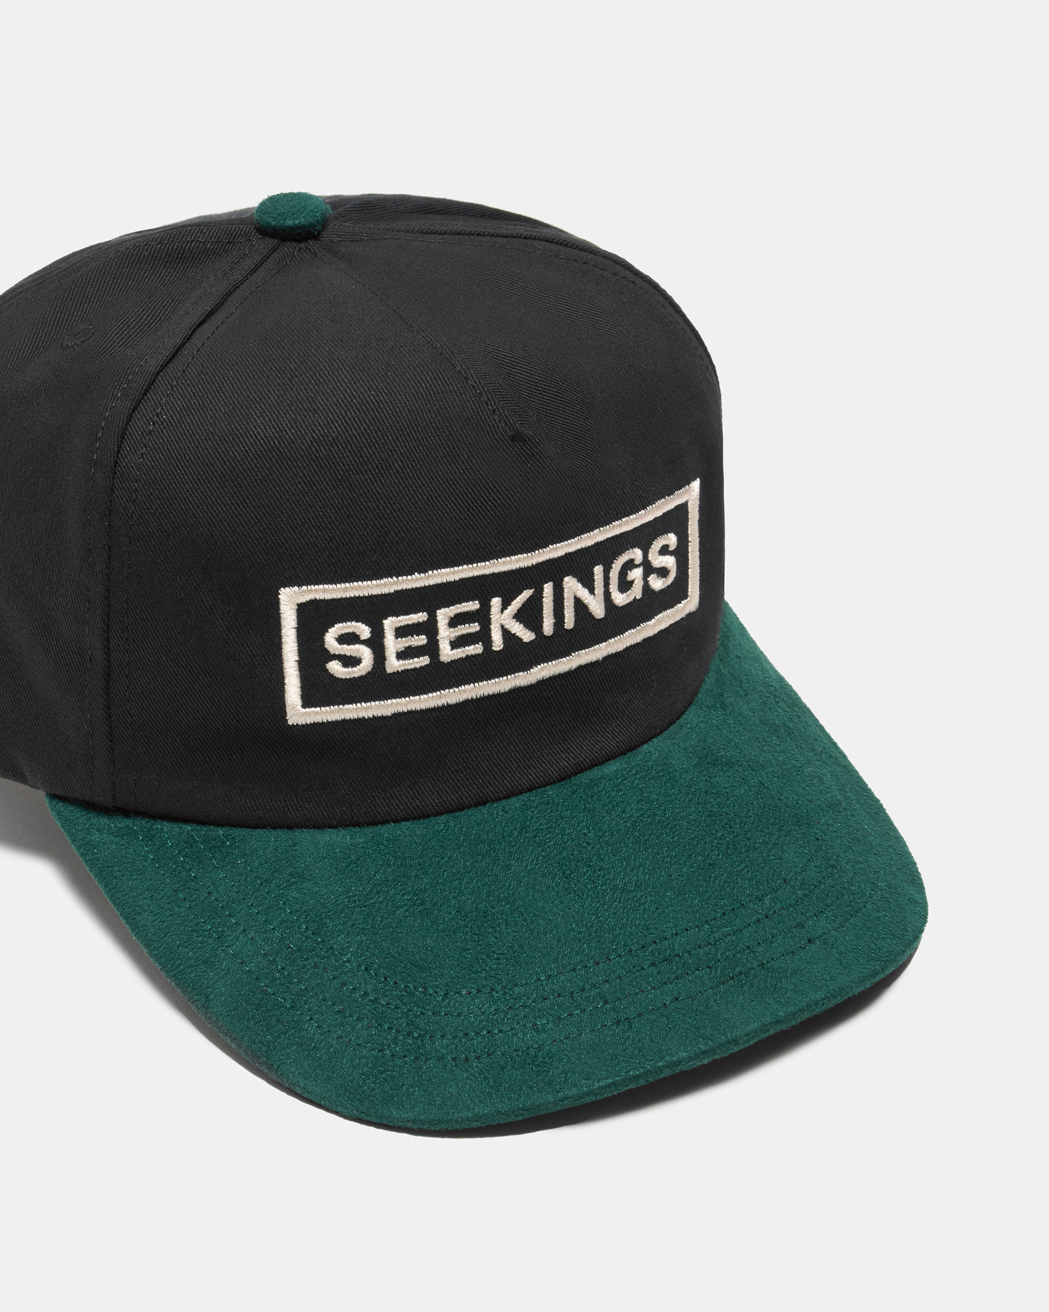 seekings-clothing-second-collection-release-price (5)